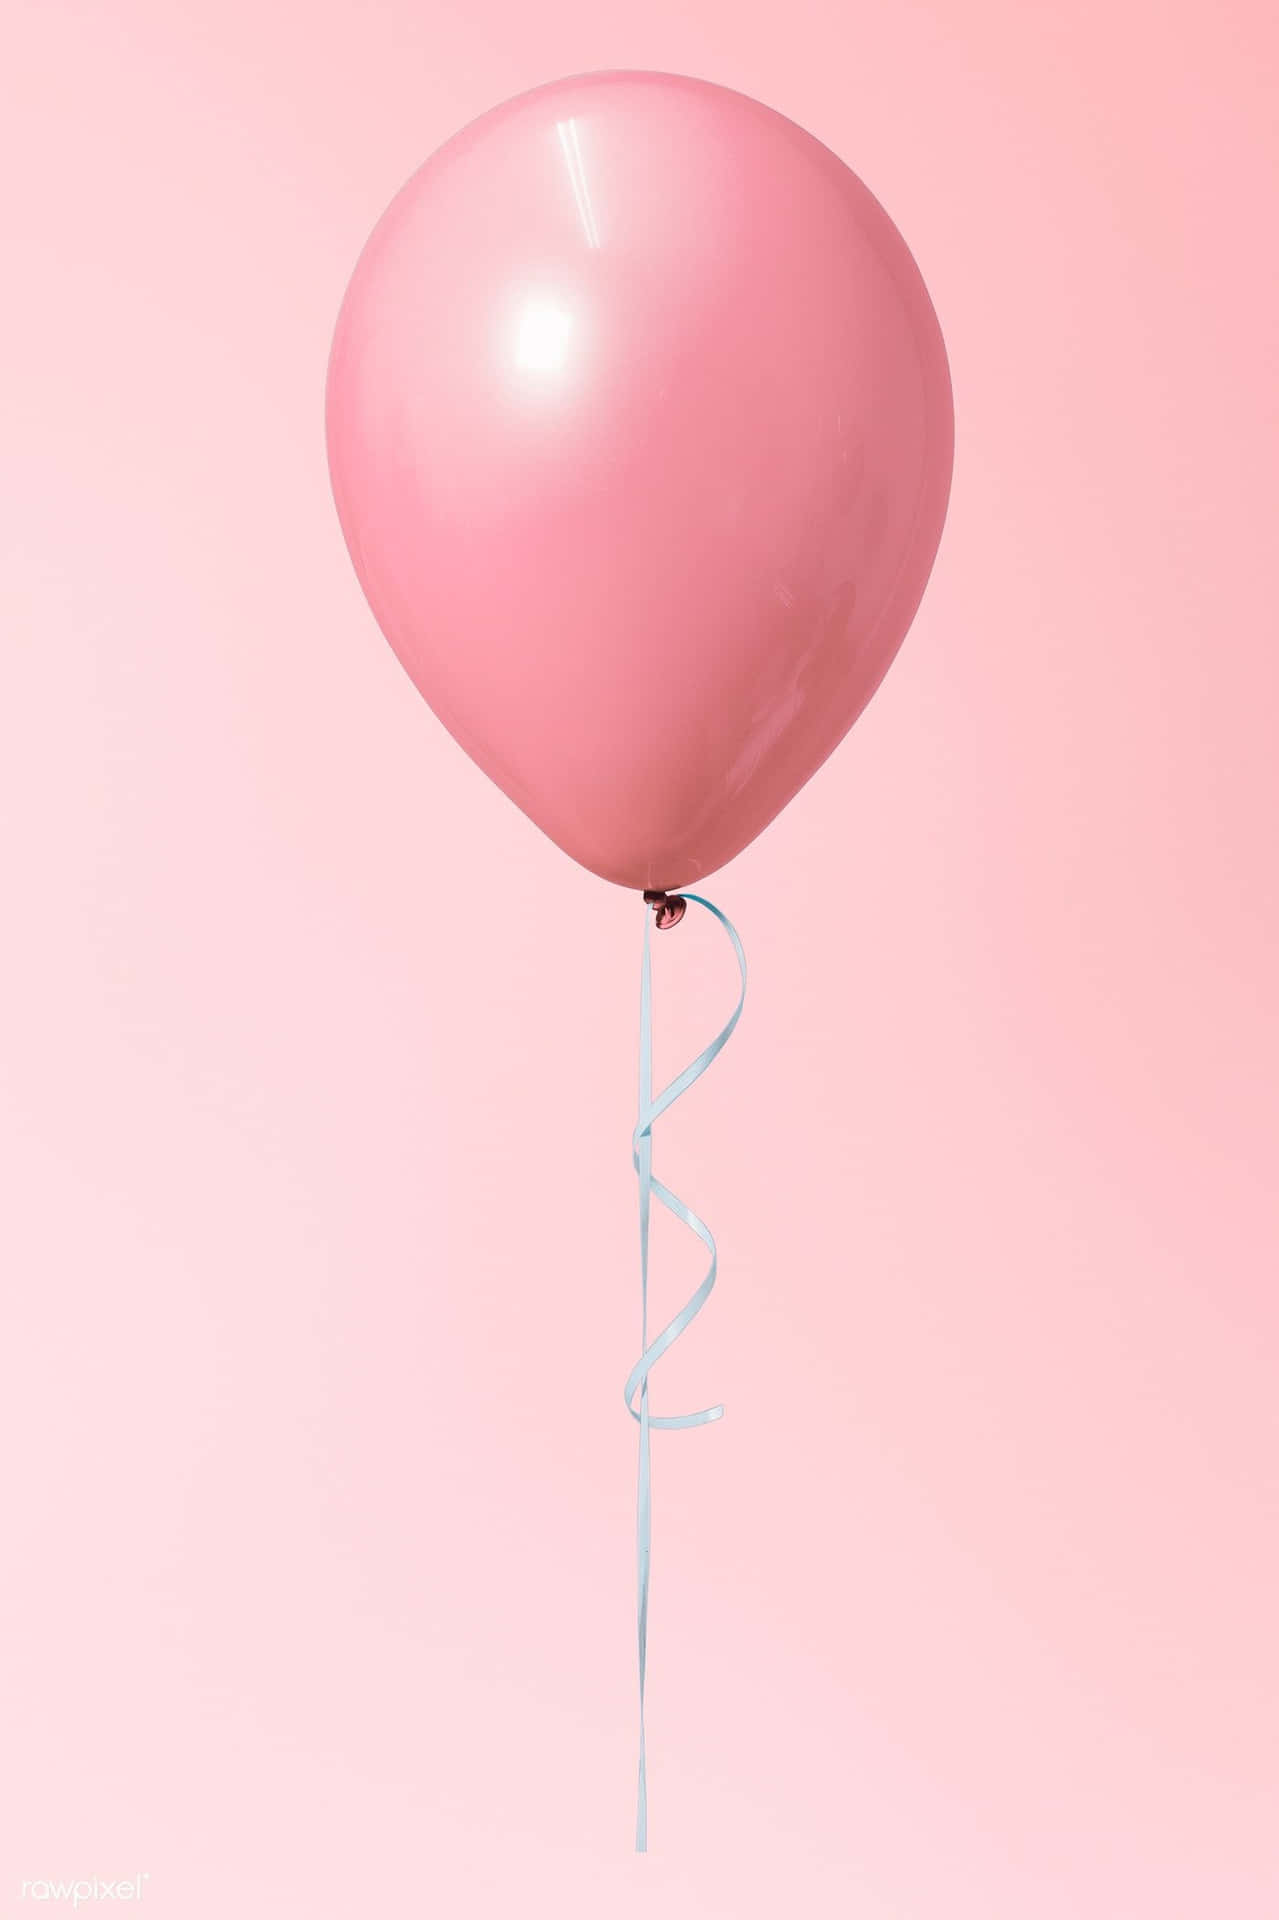 Pink Balloon On A Pink Background